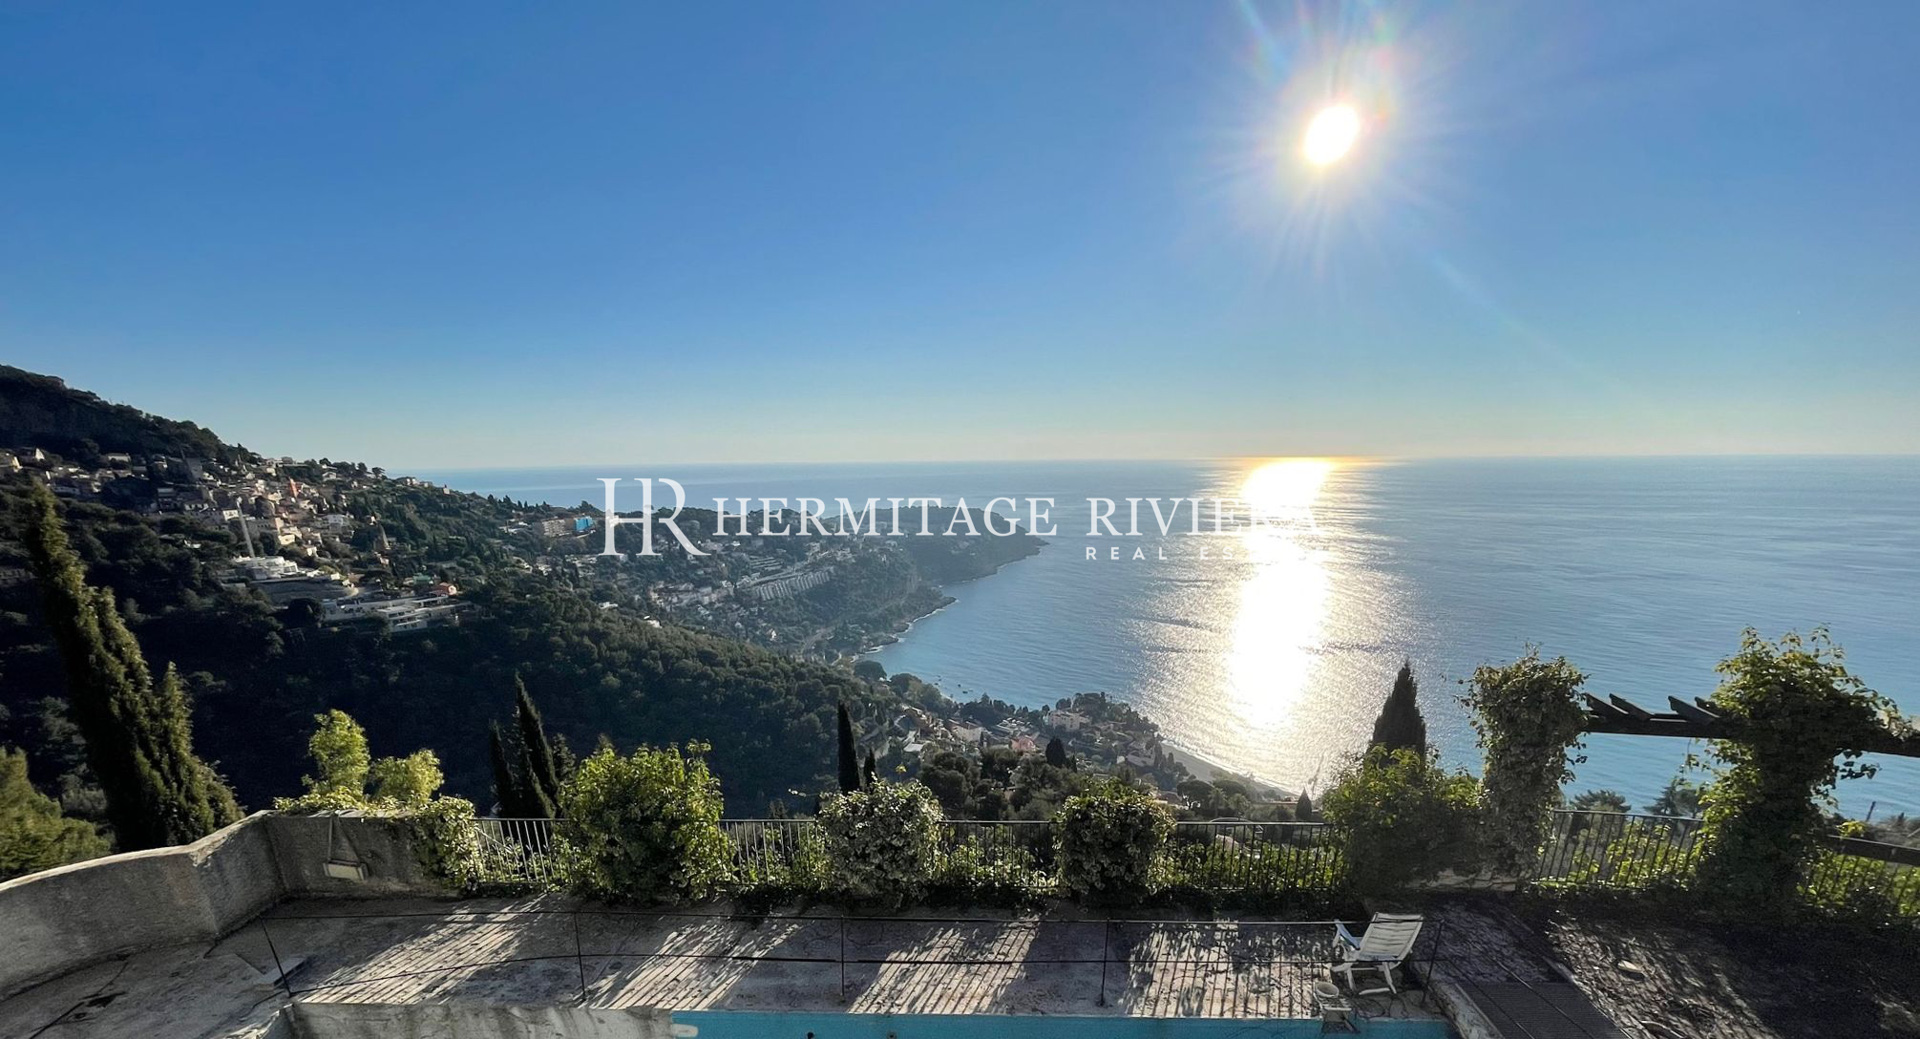 Property close Monaco with panoramic view  (image 1)